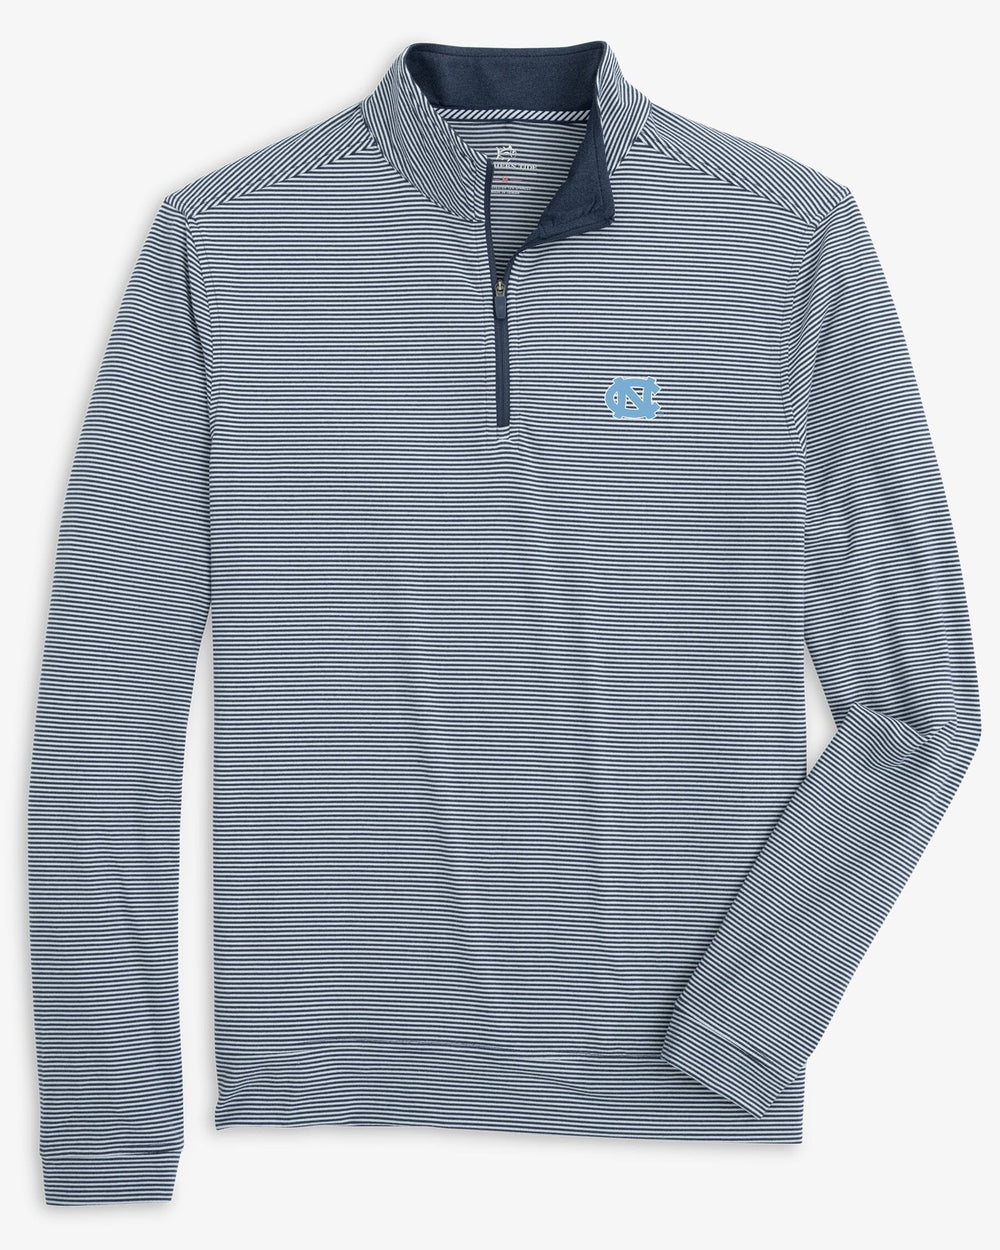 The front view of the UNC Tar Heels Cruiser Micro-Stripe Heather Quarter Zip by Southern Tide - Heather Navy